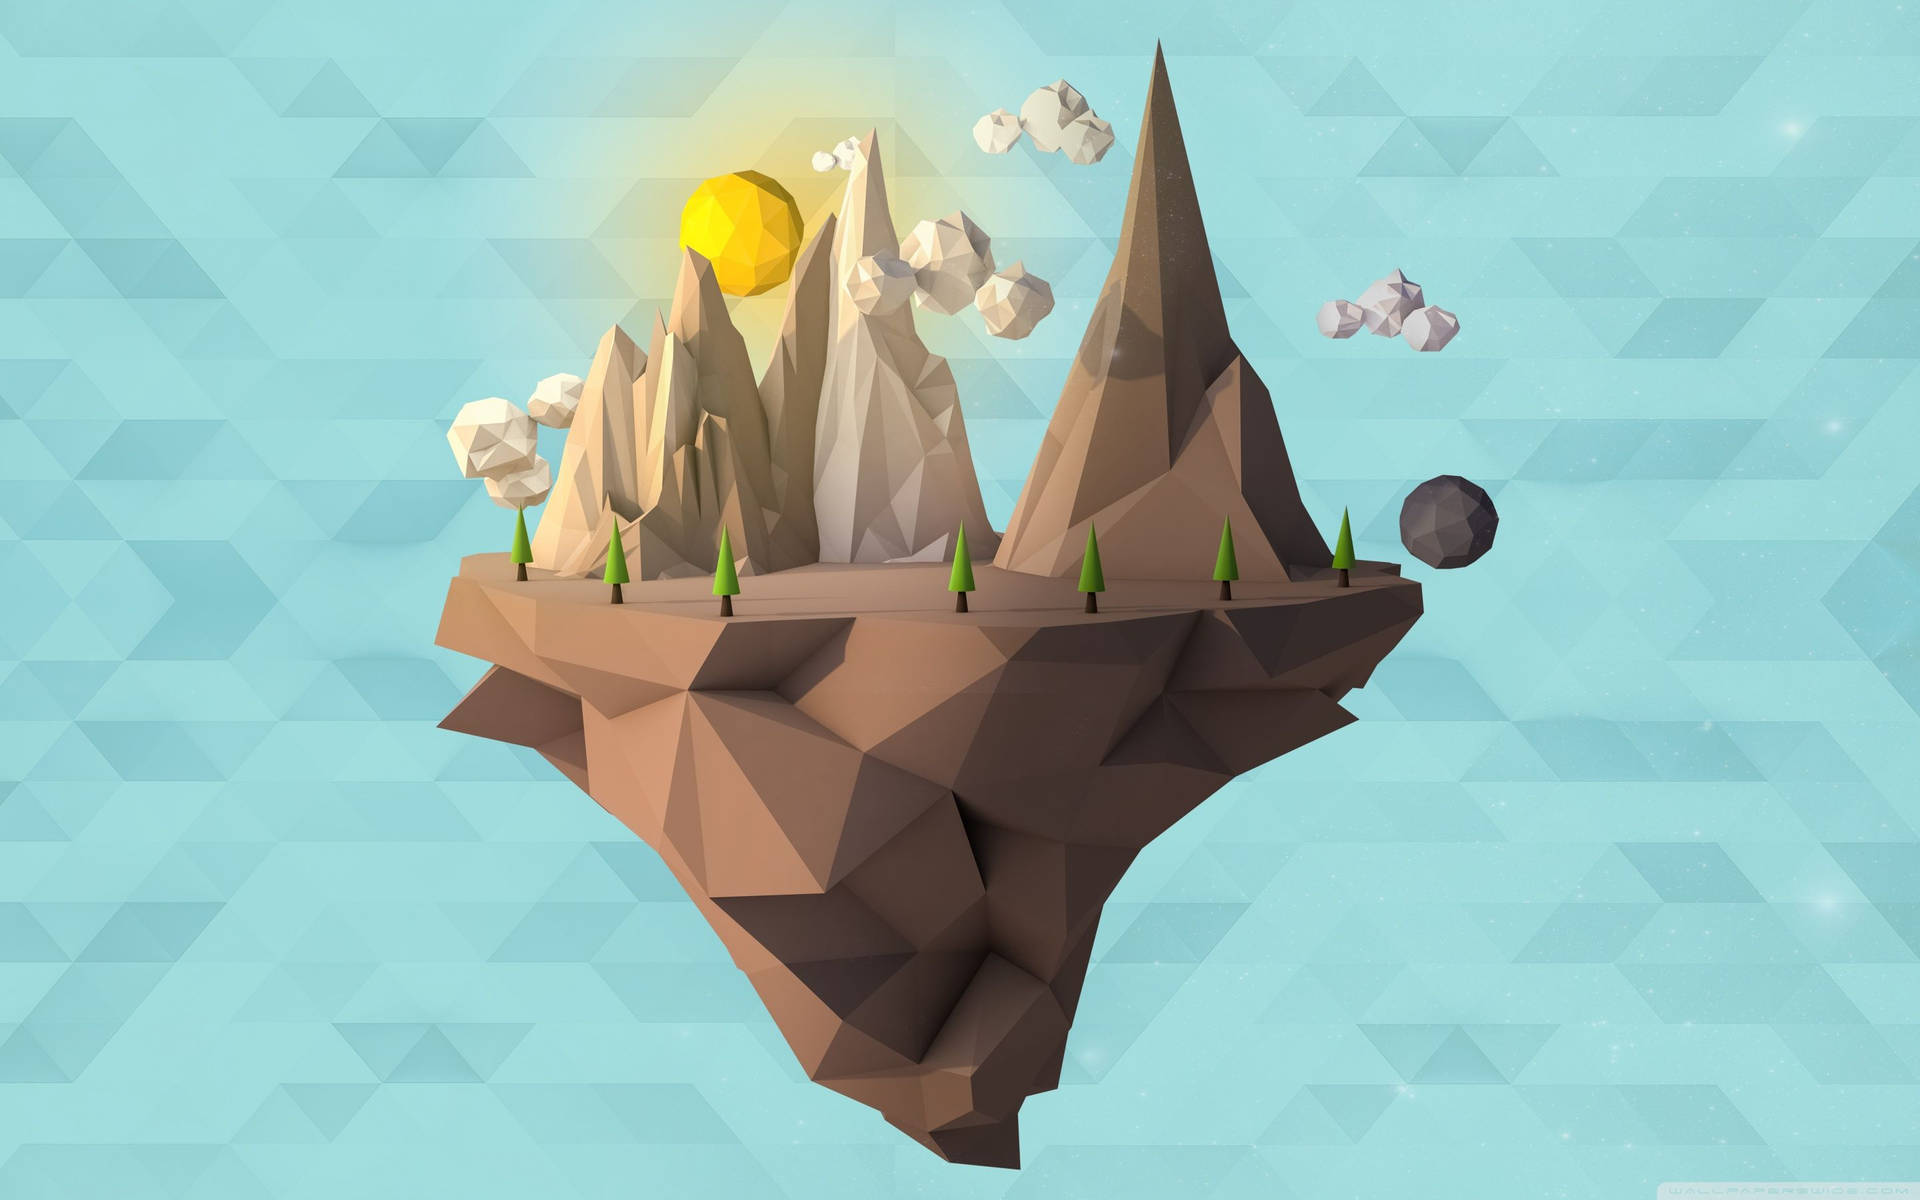 Low Poly Floating Island Wallpaper